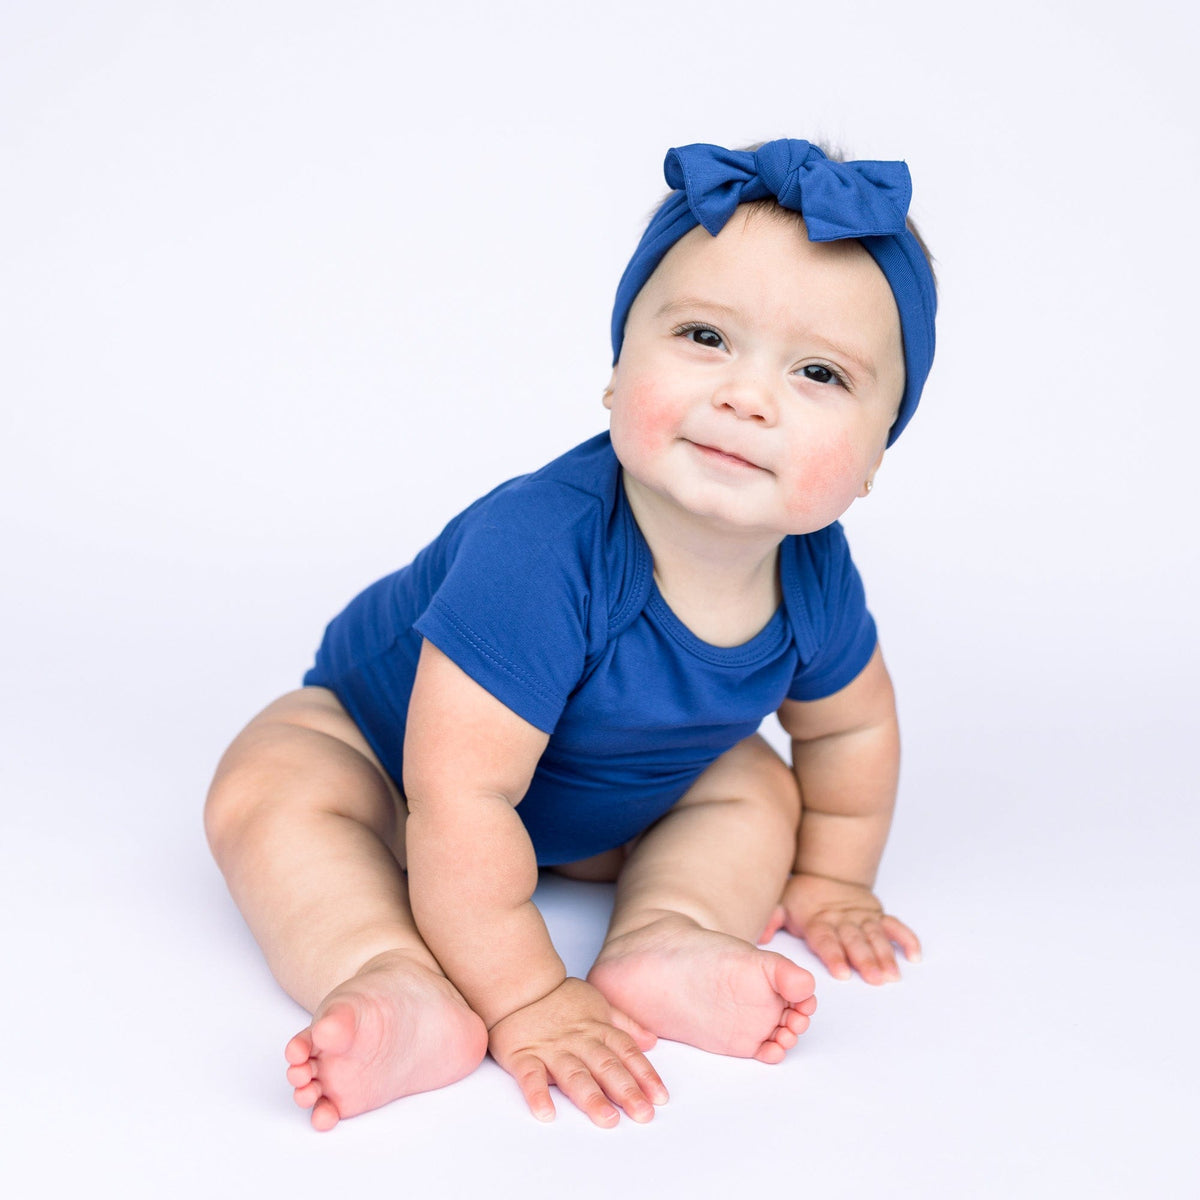 Kyte Baby Baby Bows Bow in Royal